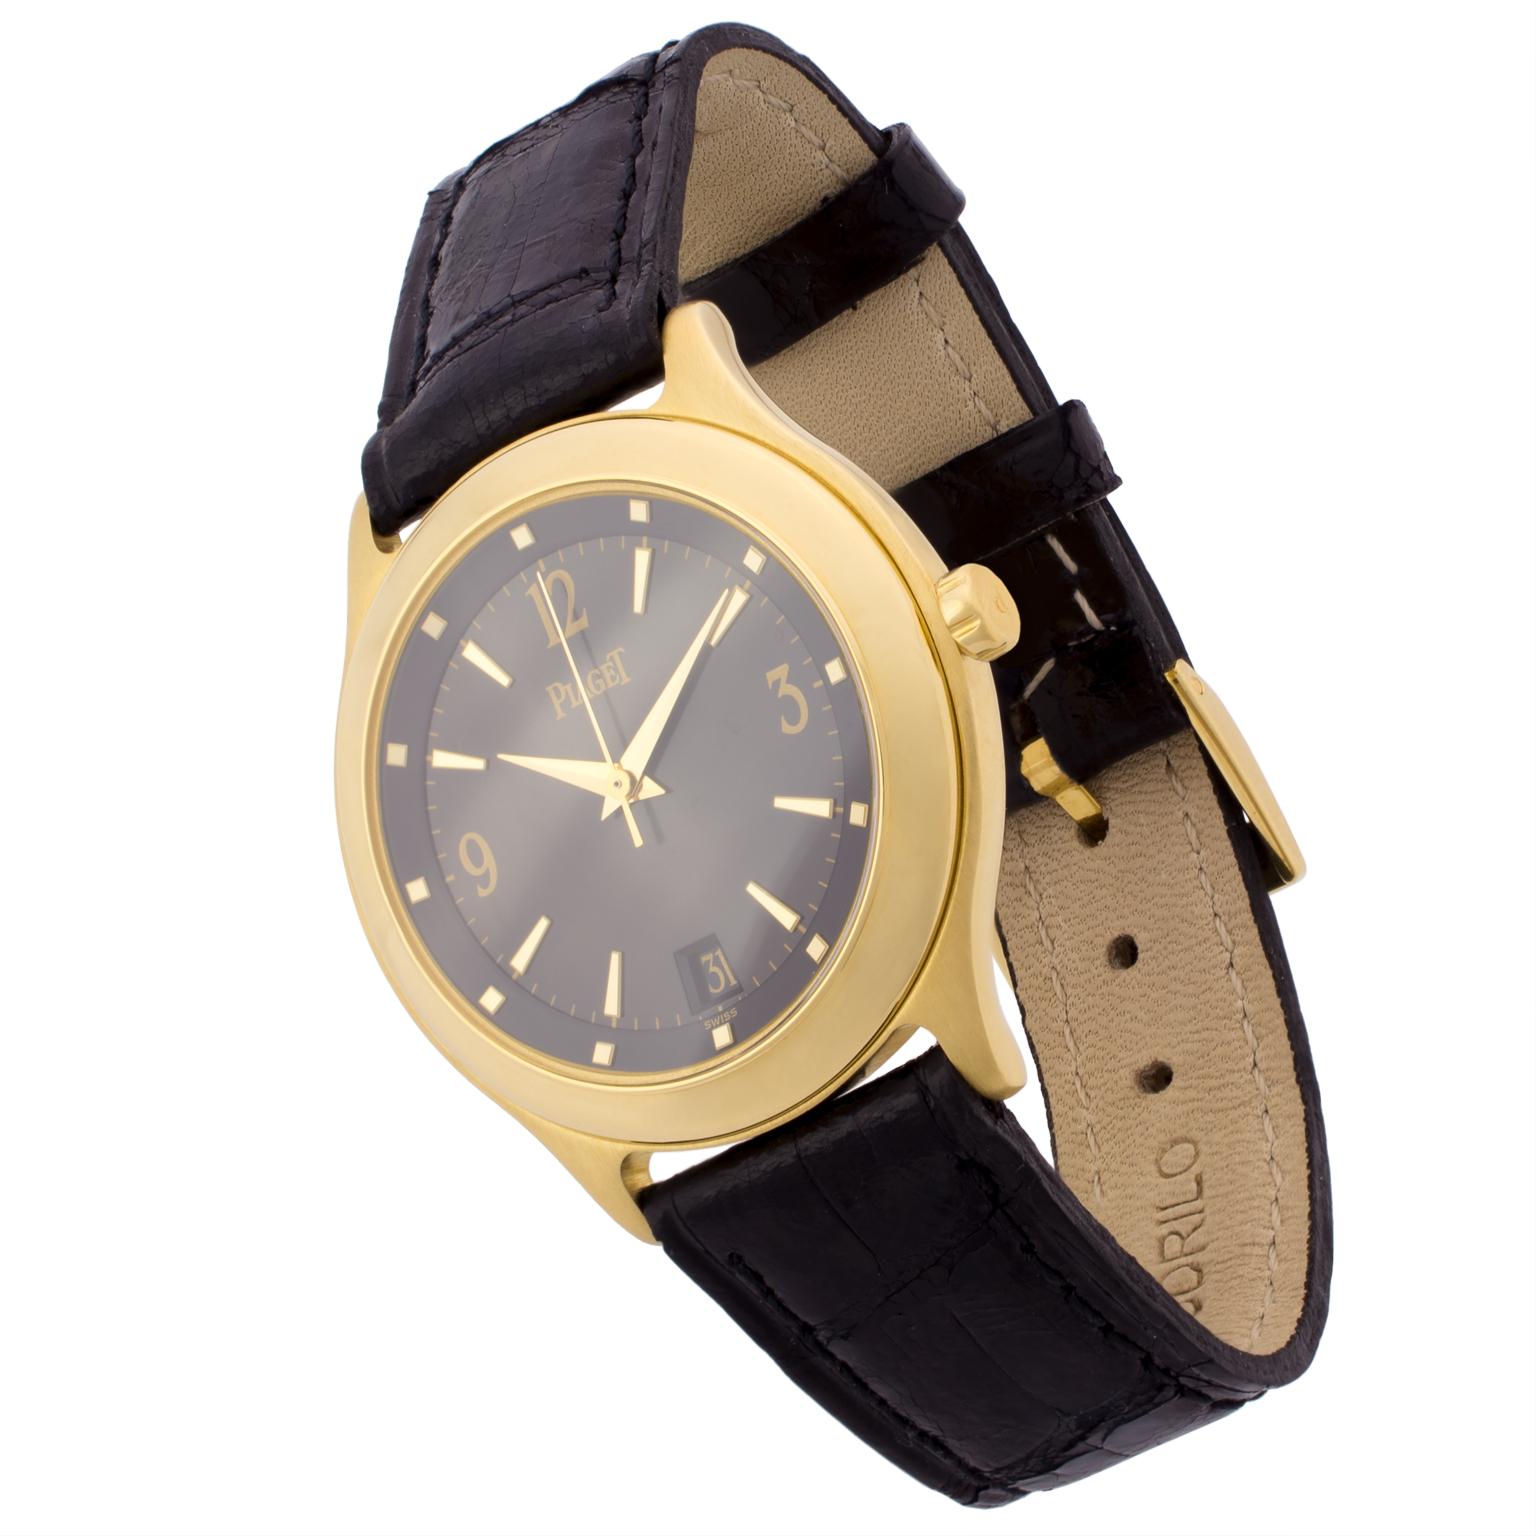 Automatic movement Piaget wristwatch, model Citea in 18K yellow gold, with centre hour, minute and seconds hands, and calendar indicator at six o'clock. Round case and black dial, with mixed arabic numerals and hour-markers. Original gold clasp and